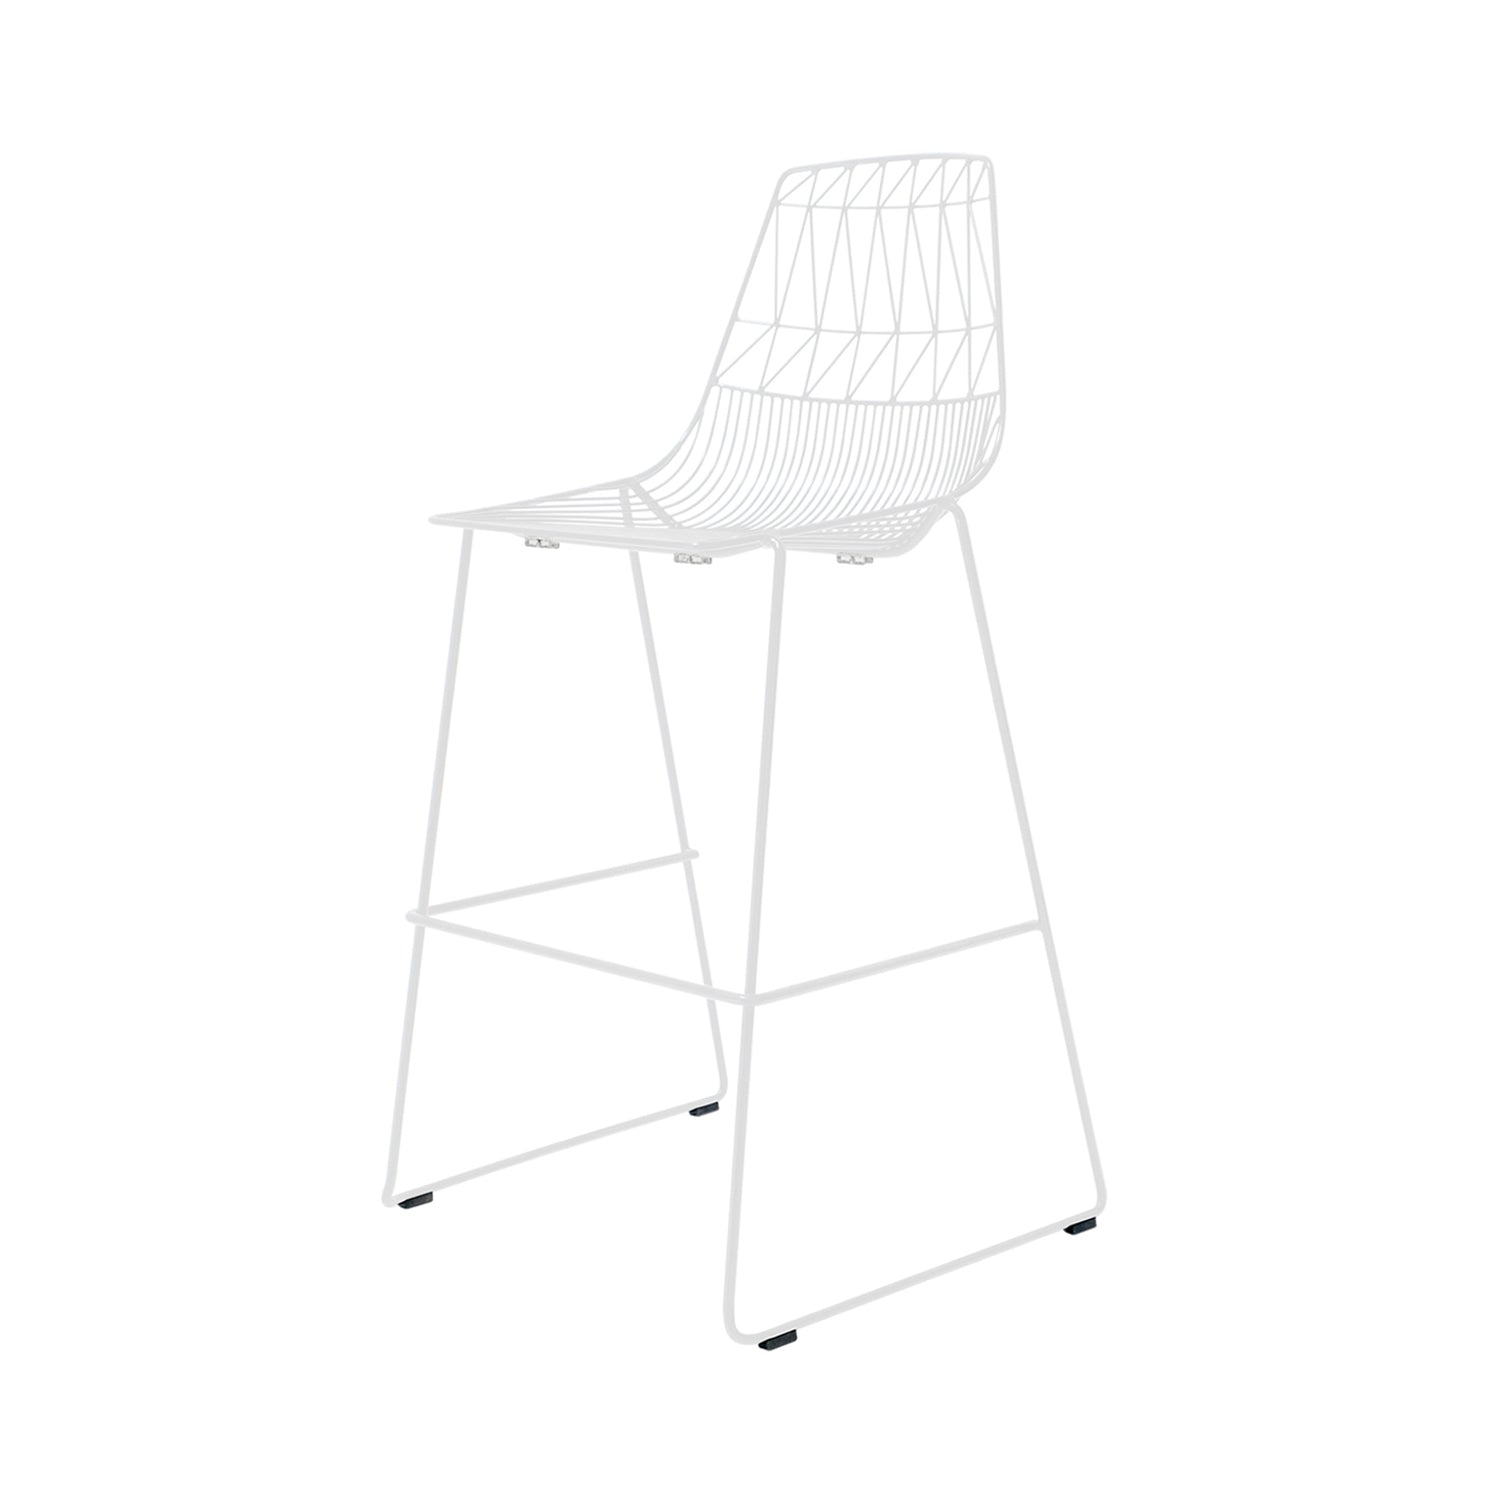 Lucy Stacking Bar + Counter Stool: Bar + White + Without Seat Pad